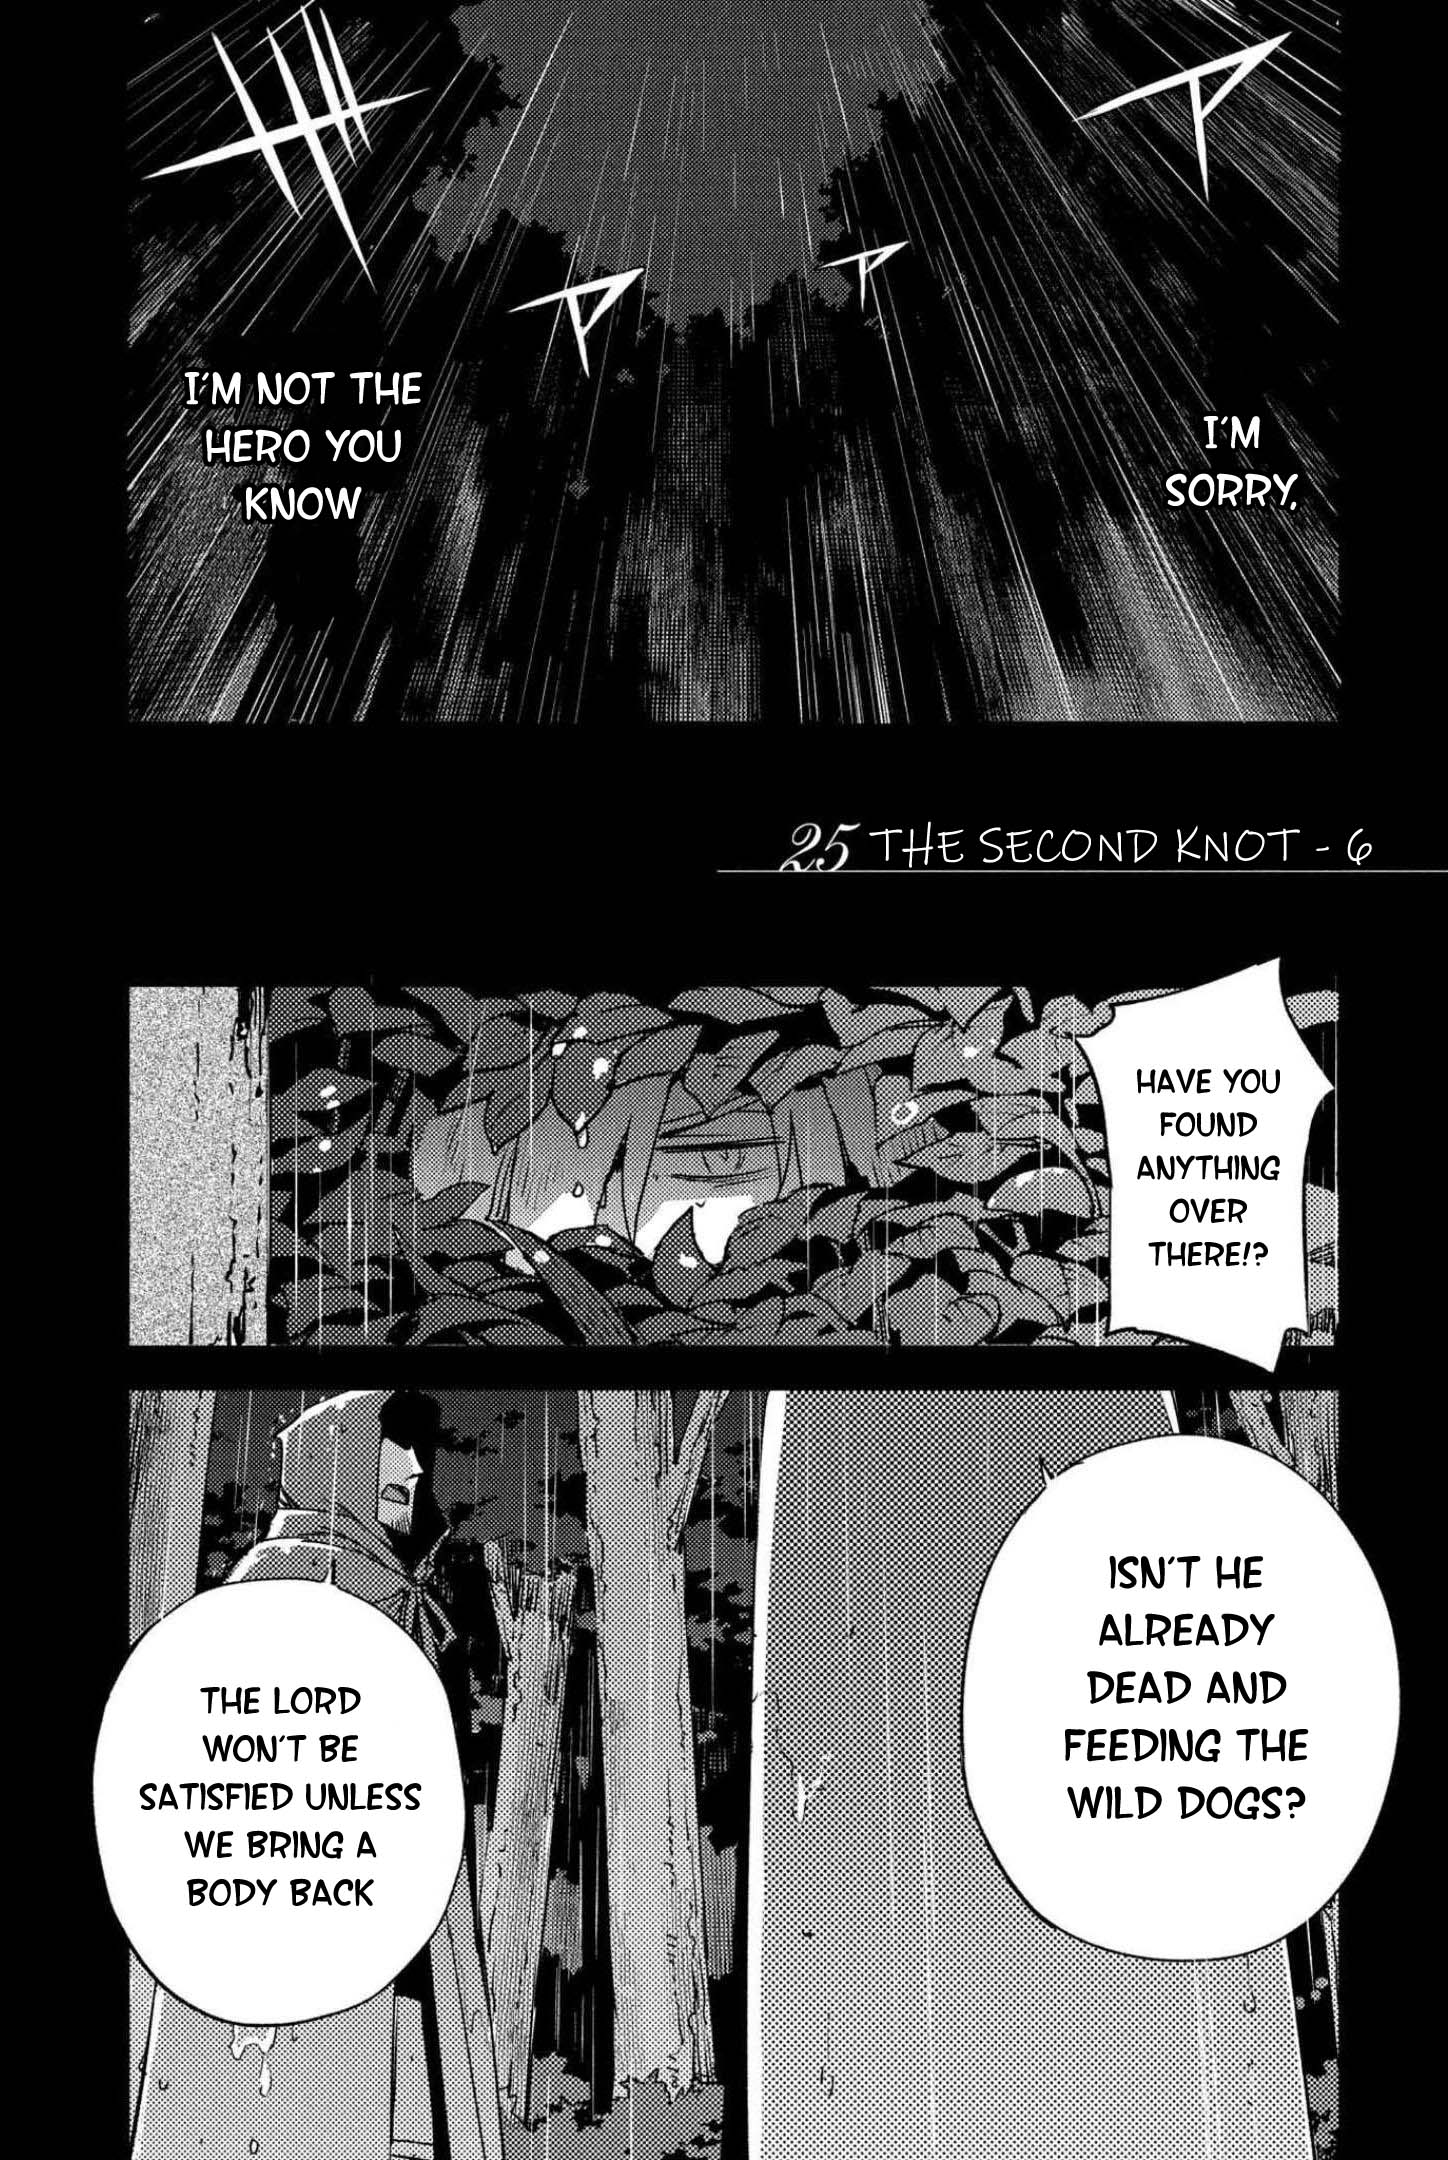 Fate/grand Order: Epic Of Remnant: Pseudo-Singularity Iv: The Forbidden Advent Garden, Salem - Heretical Salem Vol.4 Chapter 25: The Second Knot - 6 - Picture 2